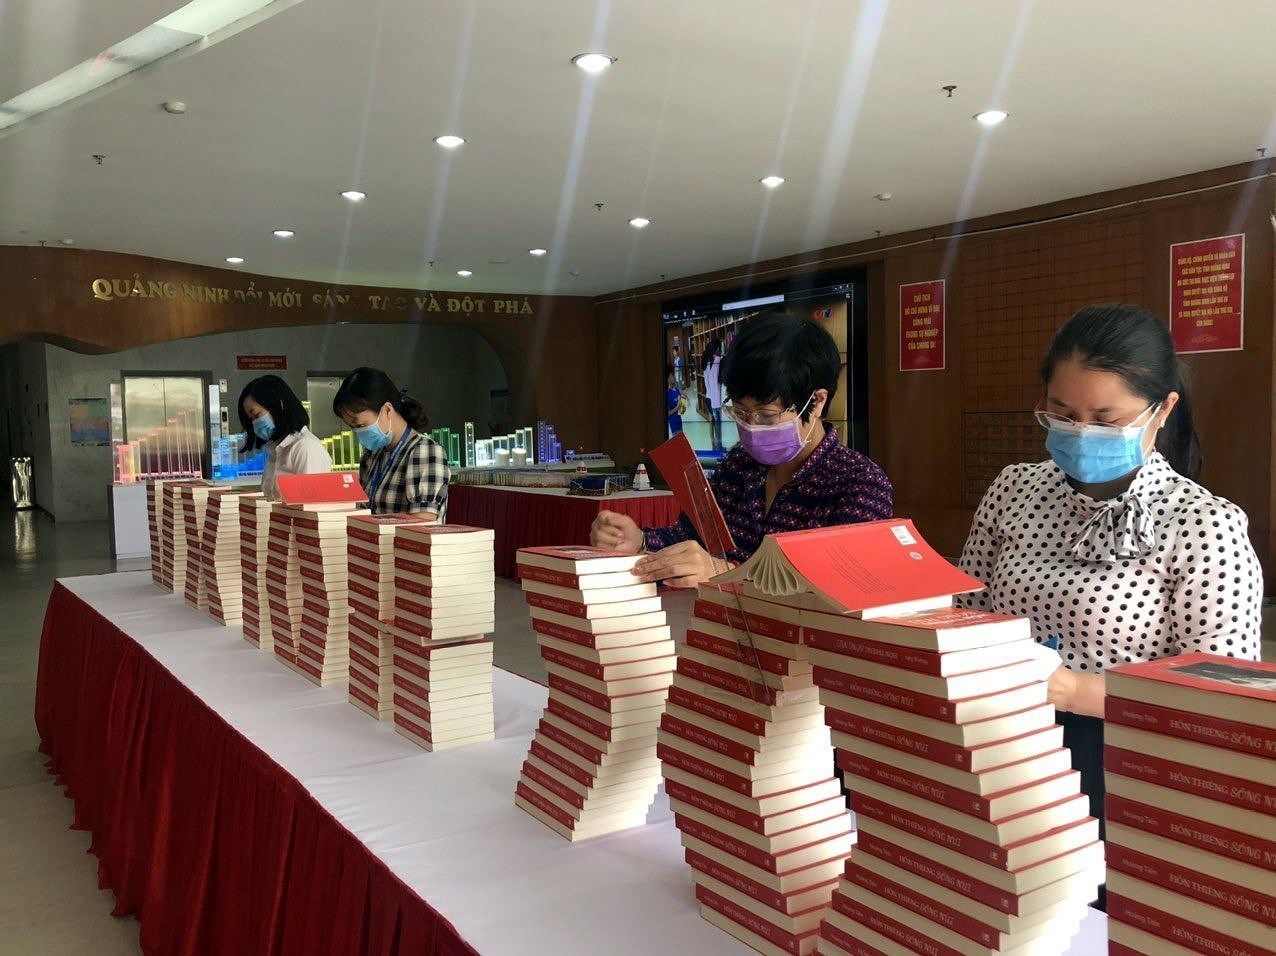 Books on election on display in Quang Ninh province hinh anh 2